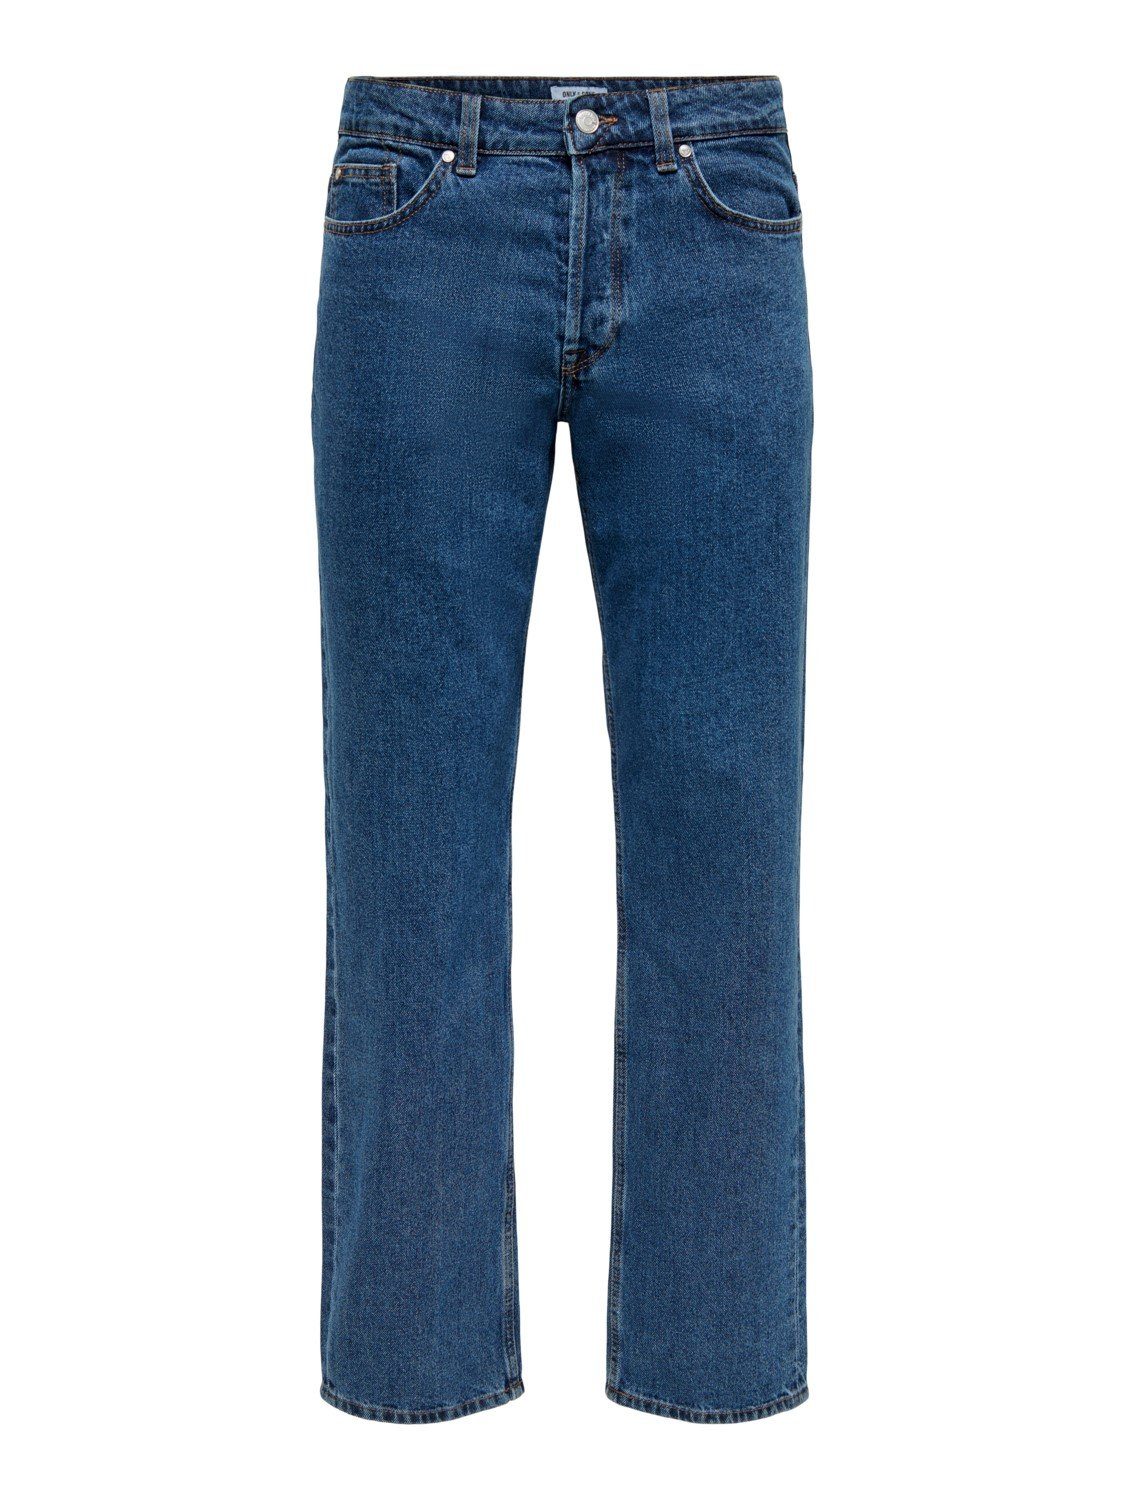 BLUE & ONSEDGE aus Relax-fit-Jeans ONLY 3813 SONS D. Baumwolle